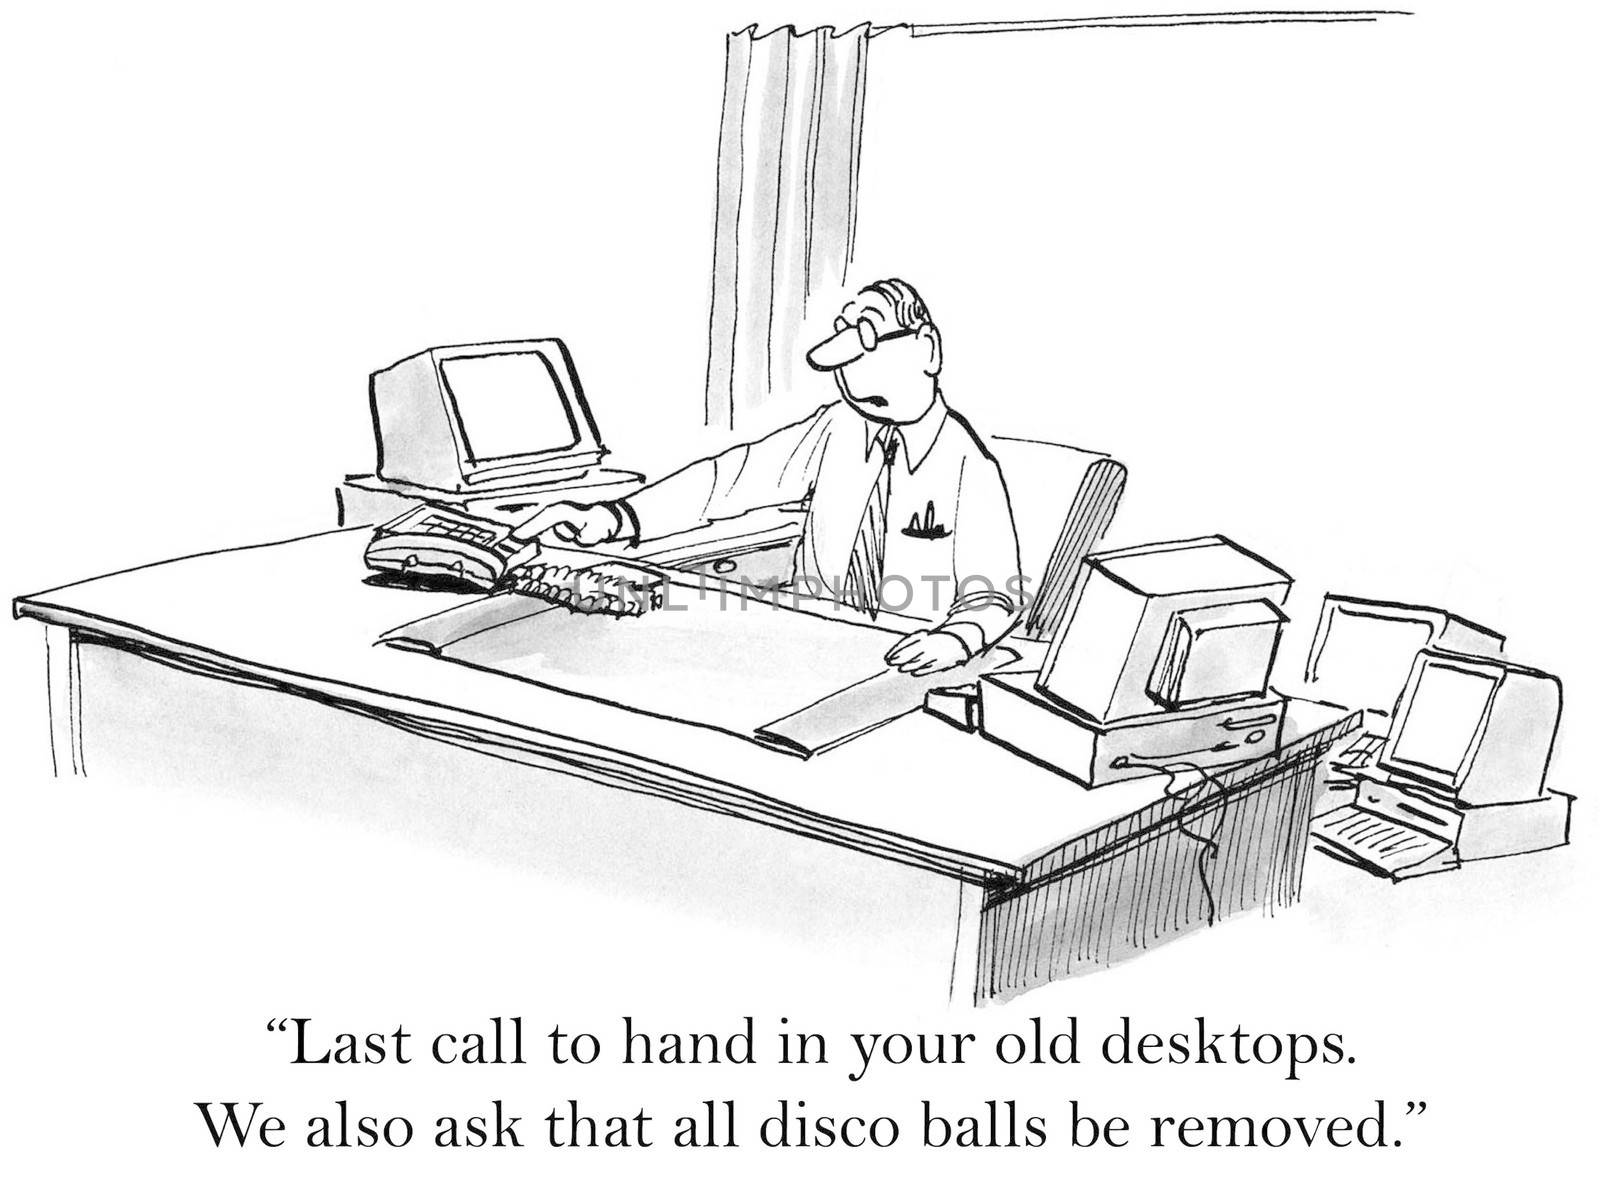 "Last call to hand in your old desktops. We also ask that all disco balls be removed."